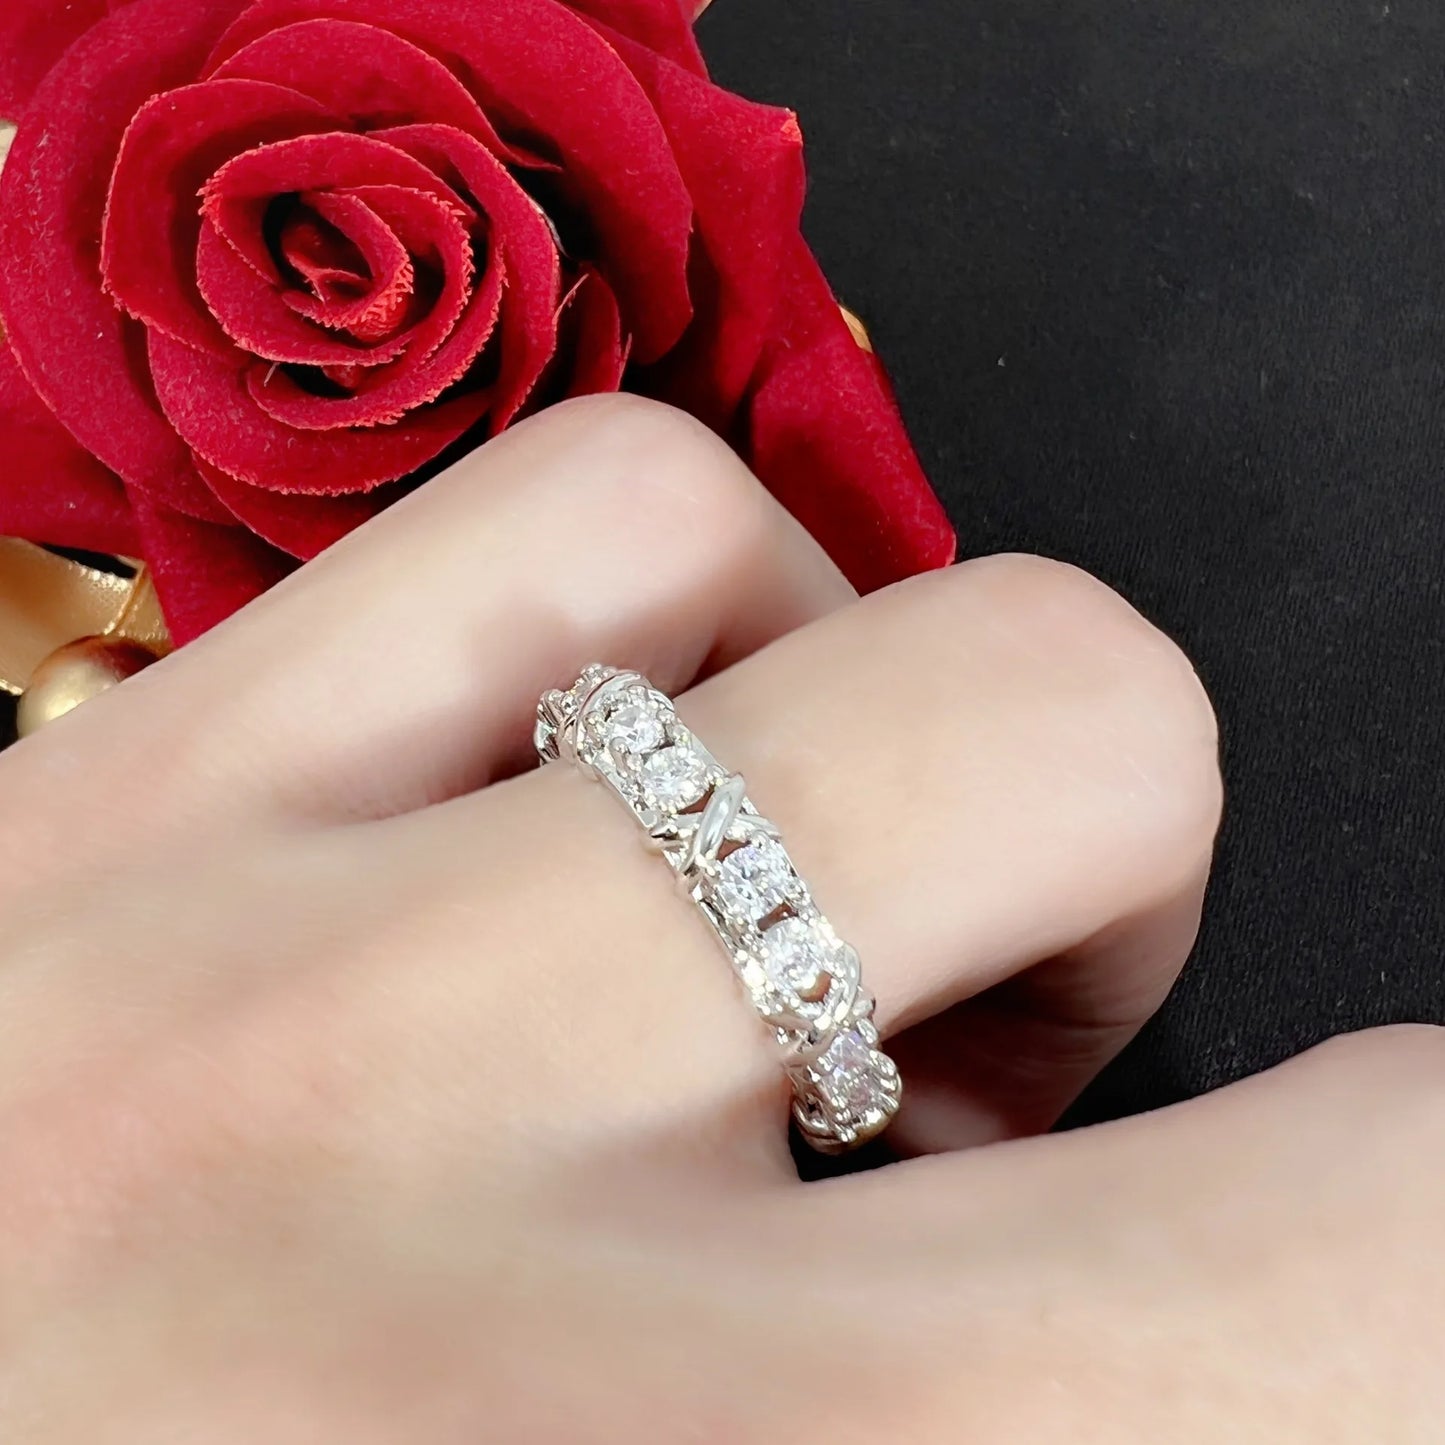 Luxury 925 sterling silver intertwined with zircon crystal ring